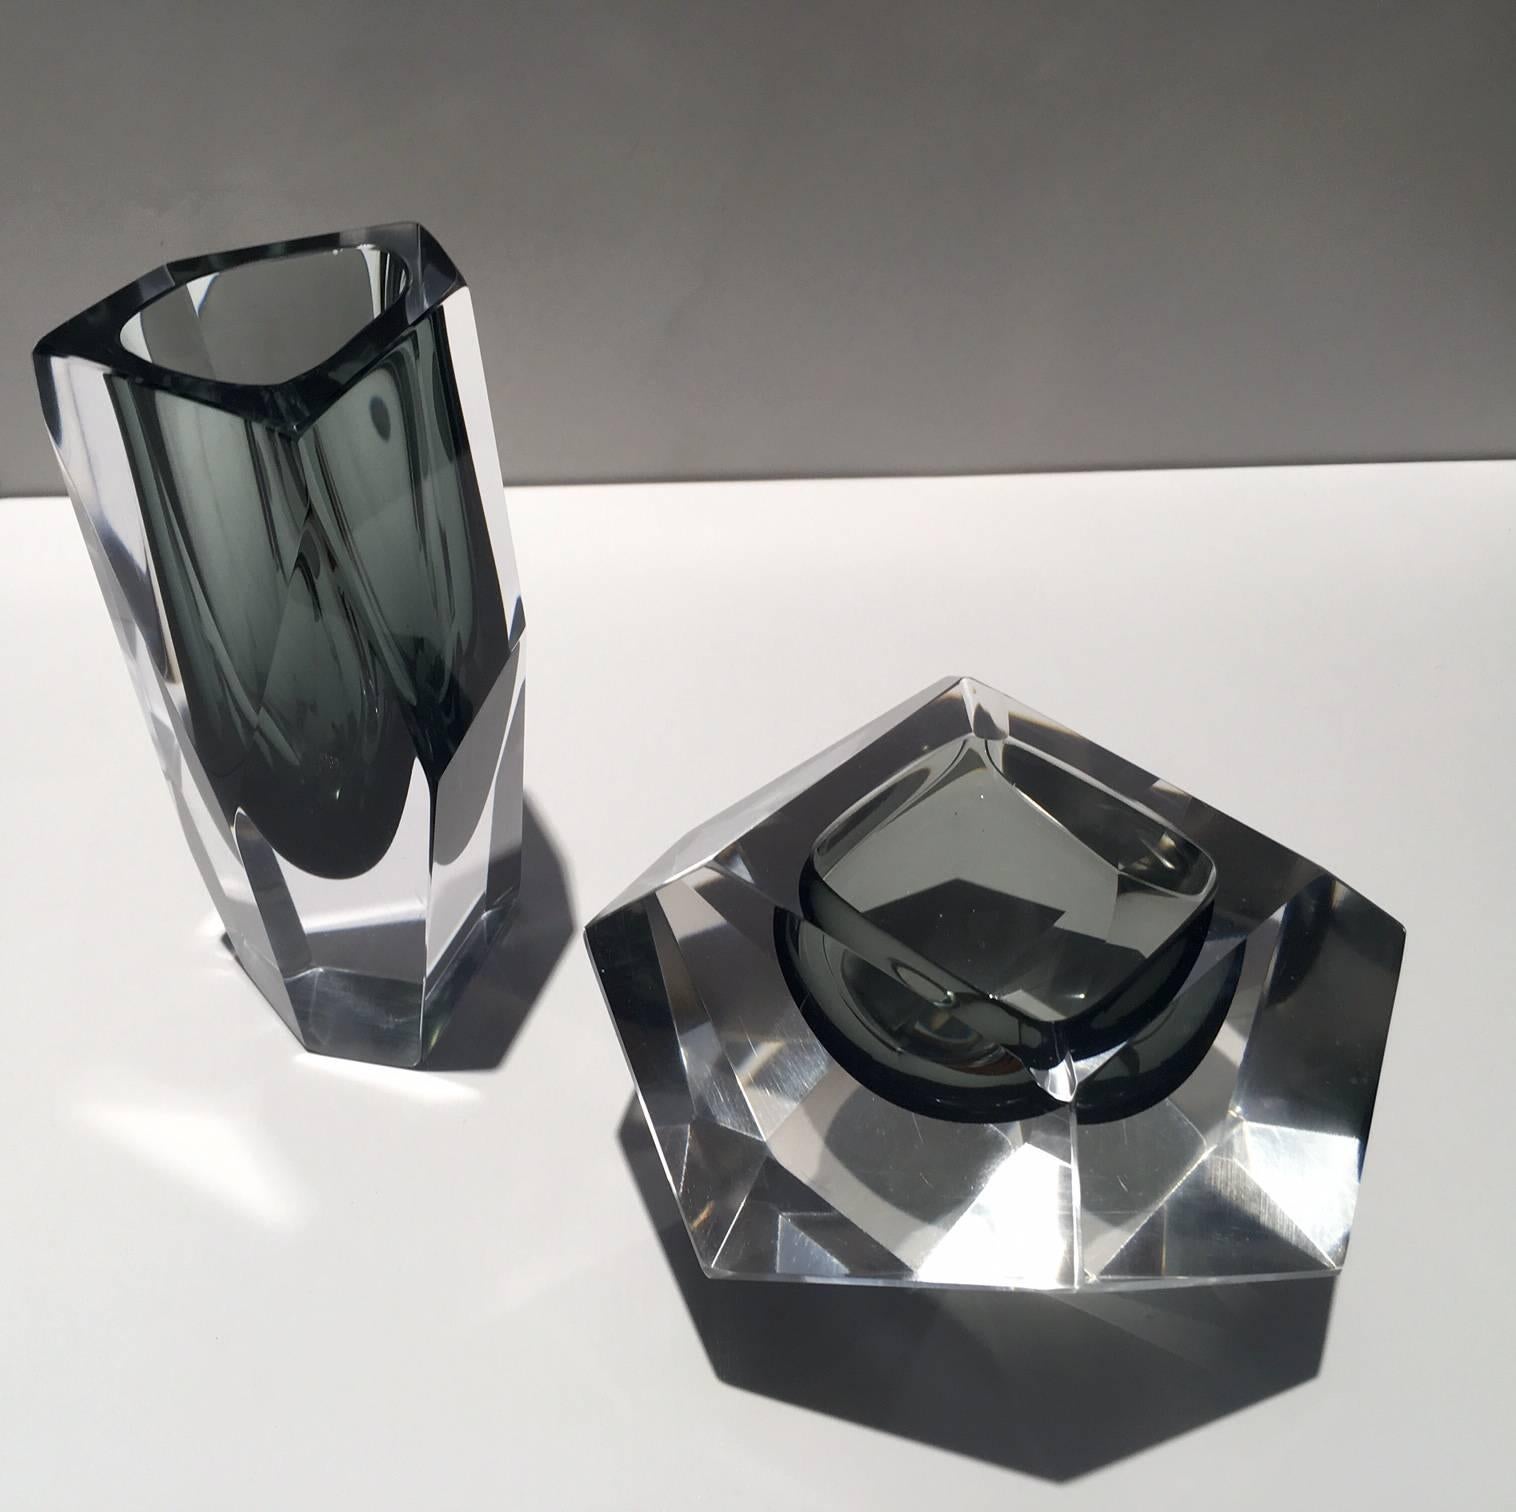 Stunning set of Italian Murano glass pieces attributed to Flavio Poli (1900-1984). Set of vase and a diamond-shaped bowl/ashtray. Faceted sides and a gorgeous color combination of black and grey. These pieces shine beautifully as they capture the